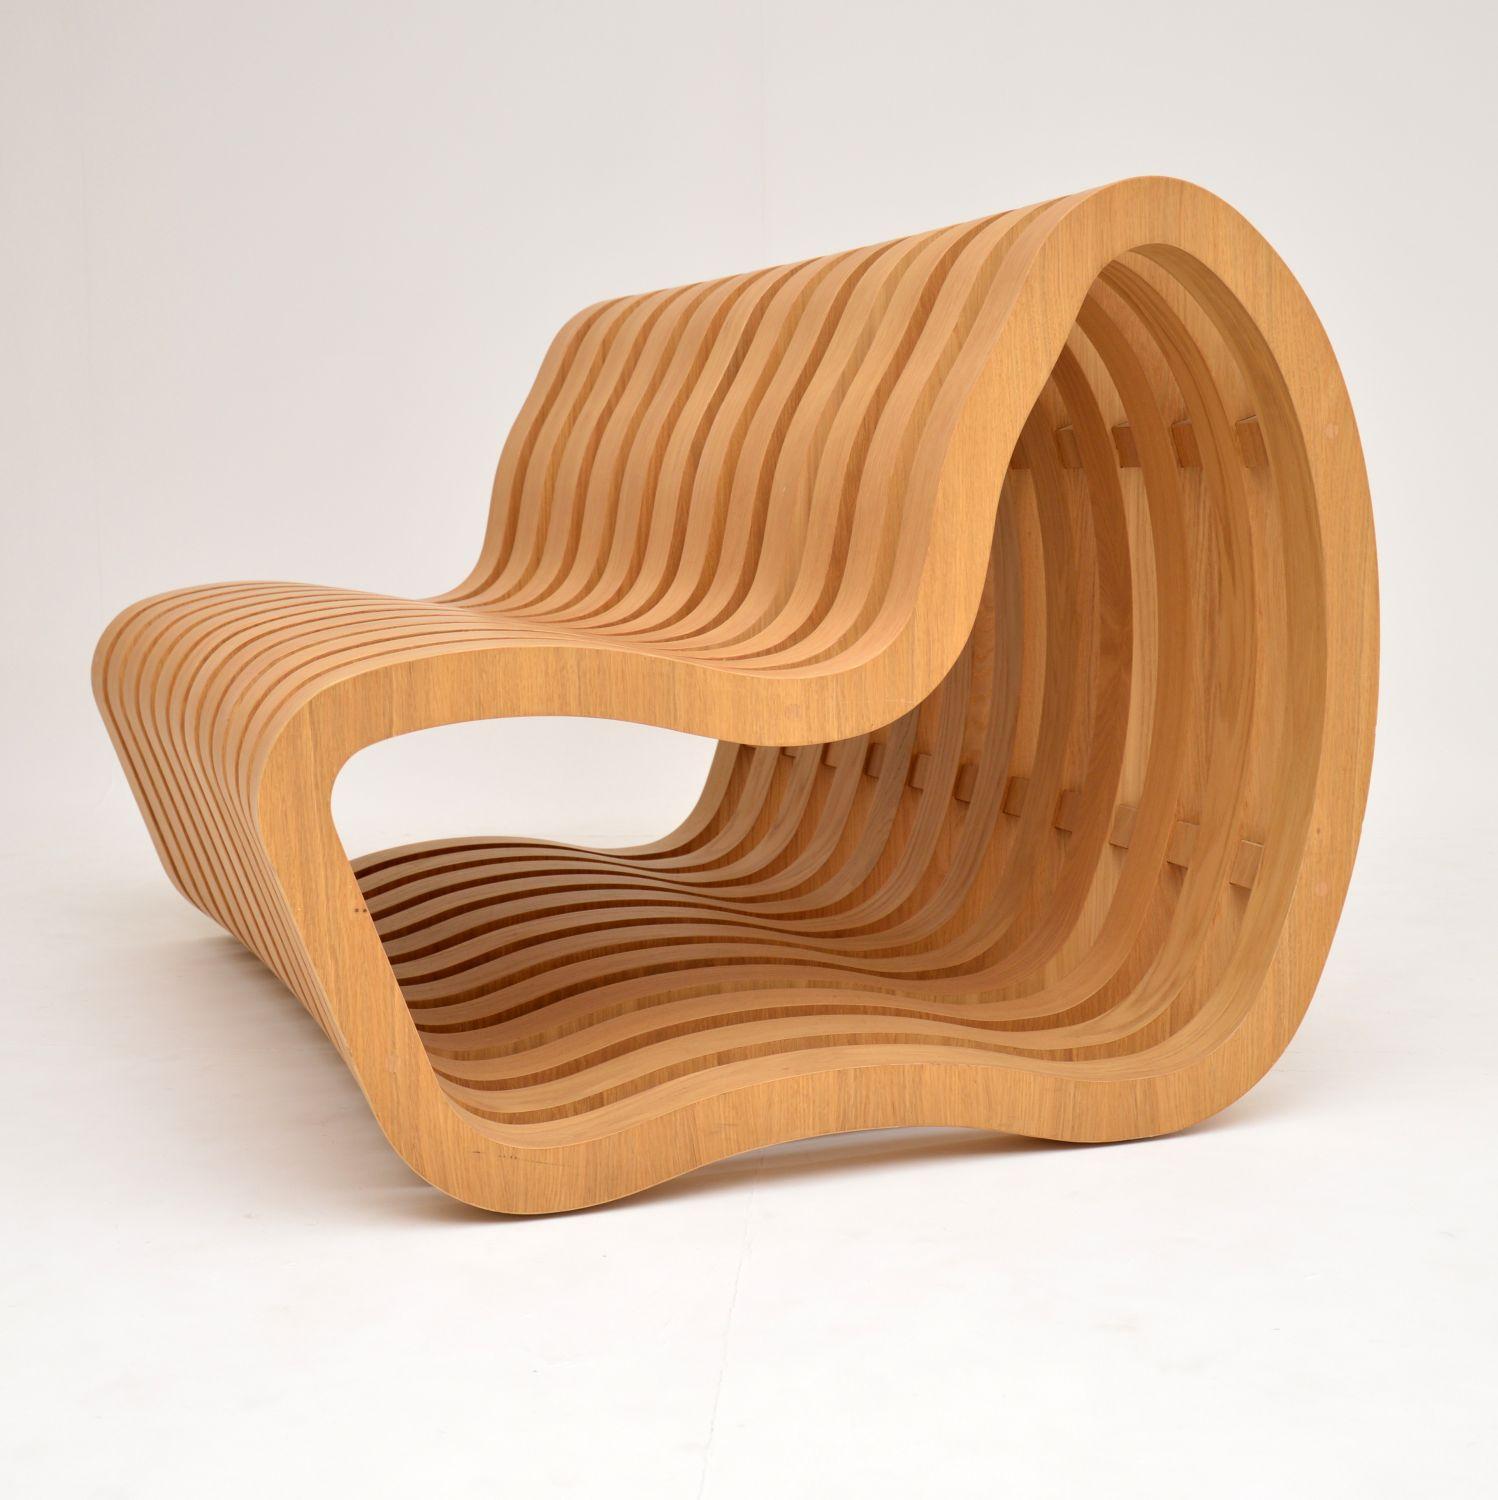 Contemporary Modernist “Curve Bench” by Nina Moeller Designs